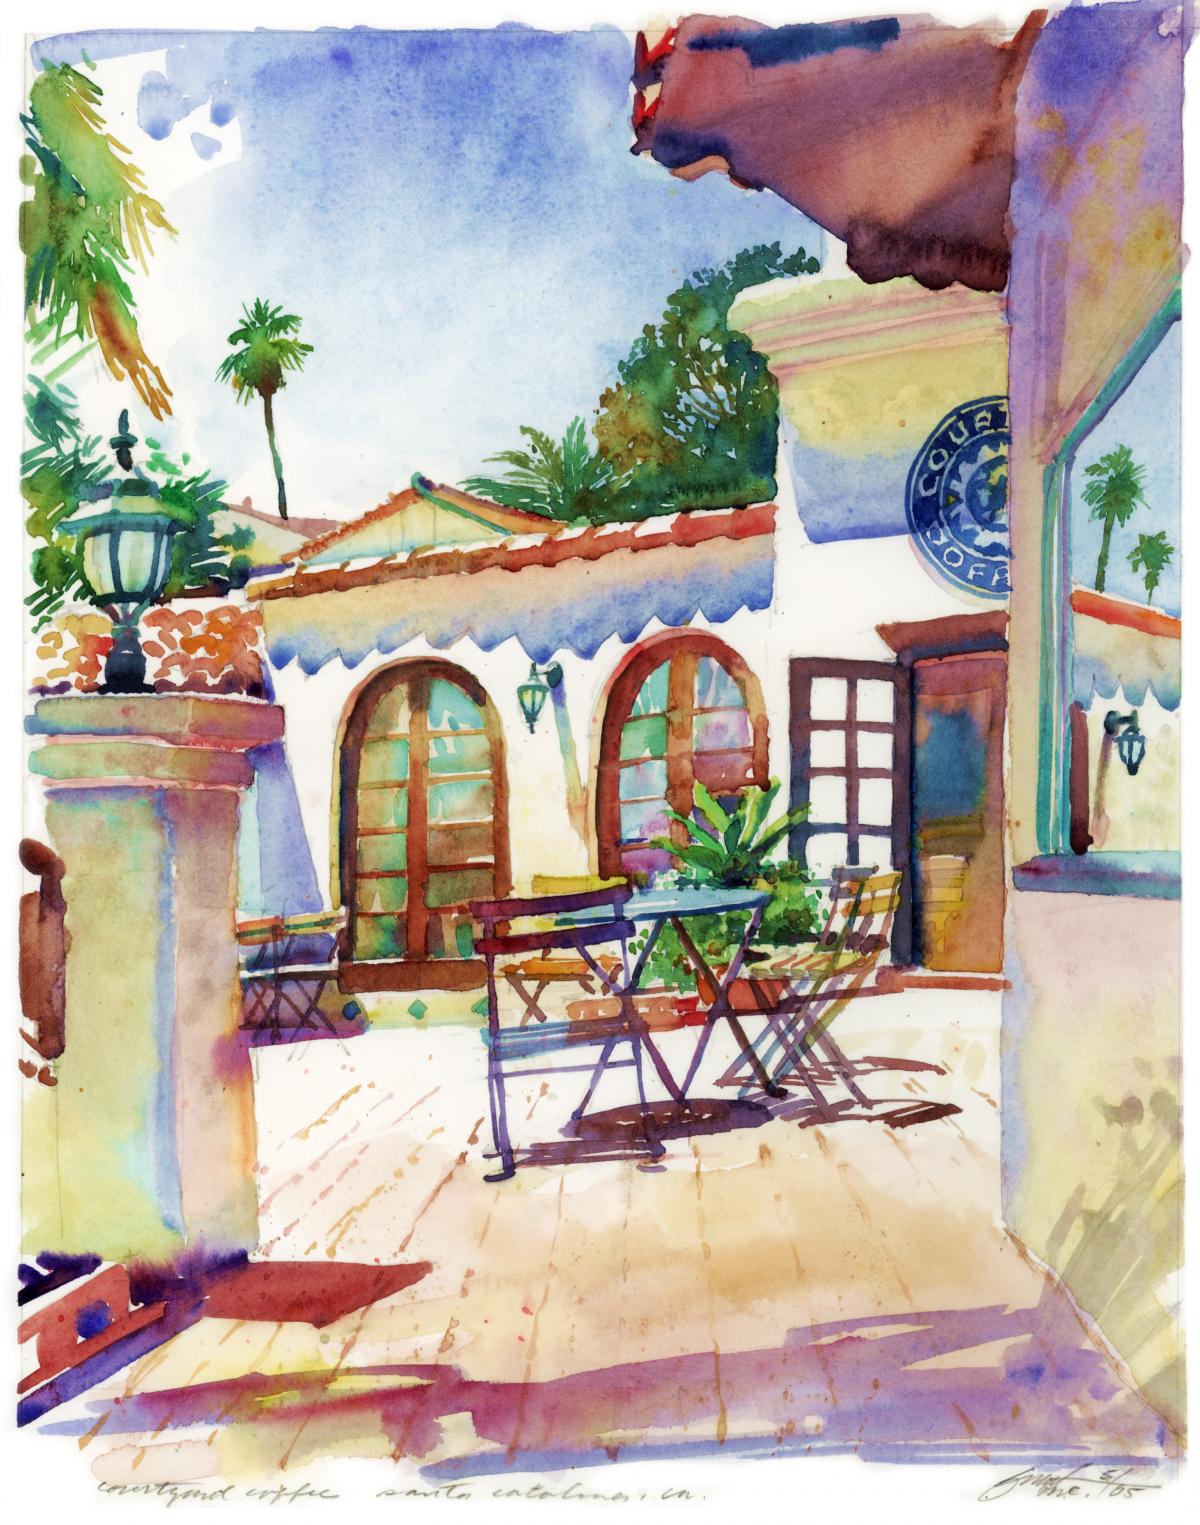 Courtyard Cafe - watercolor landscape painting by Frank Costantino